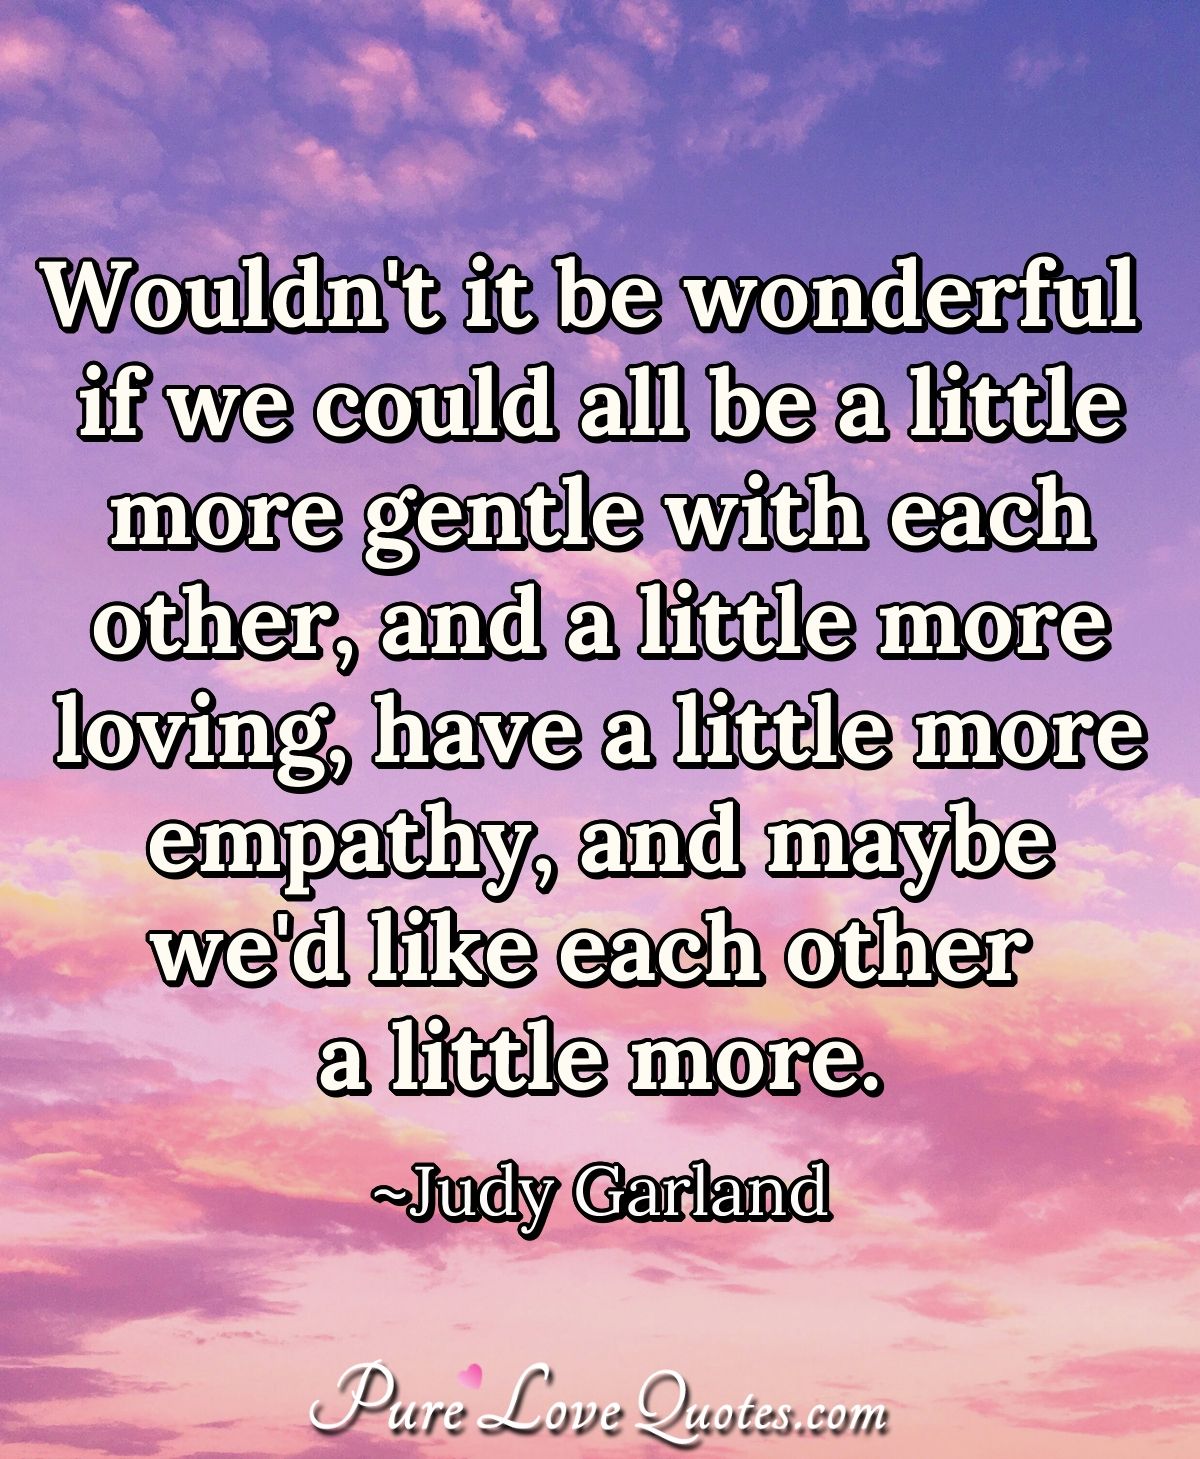 Wouldn't it be wonderful if we could all be a little more gentle with each other, and a little more loving, have a little more empathy, and maybe we'd like each other a little more. - Judy Garland